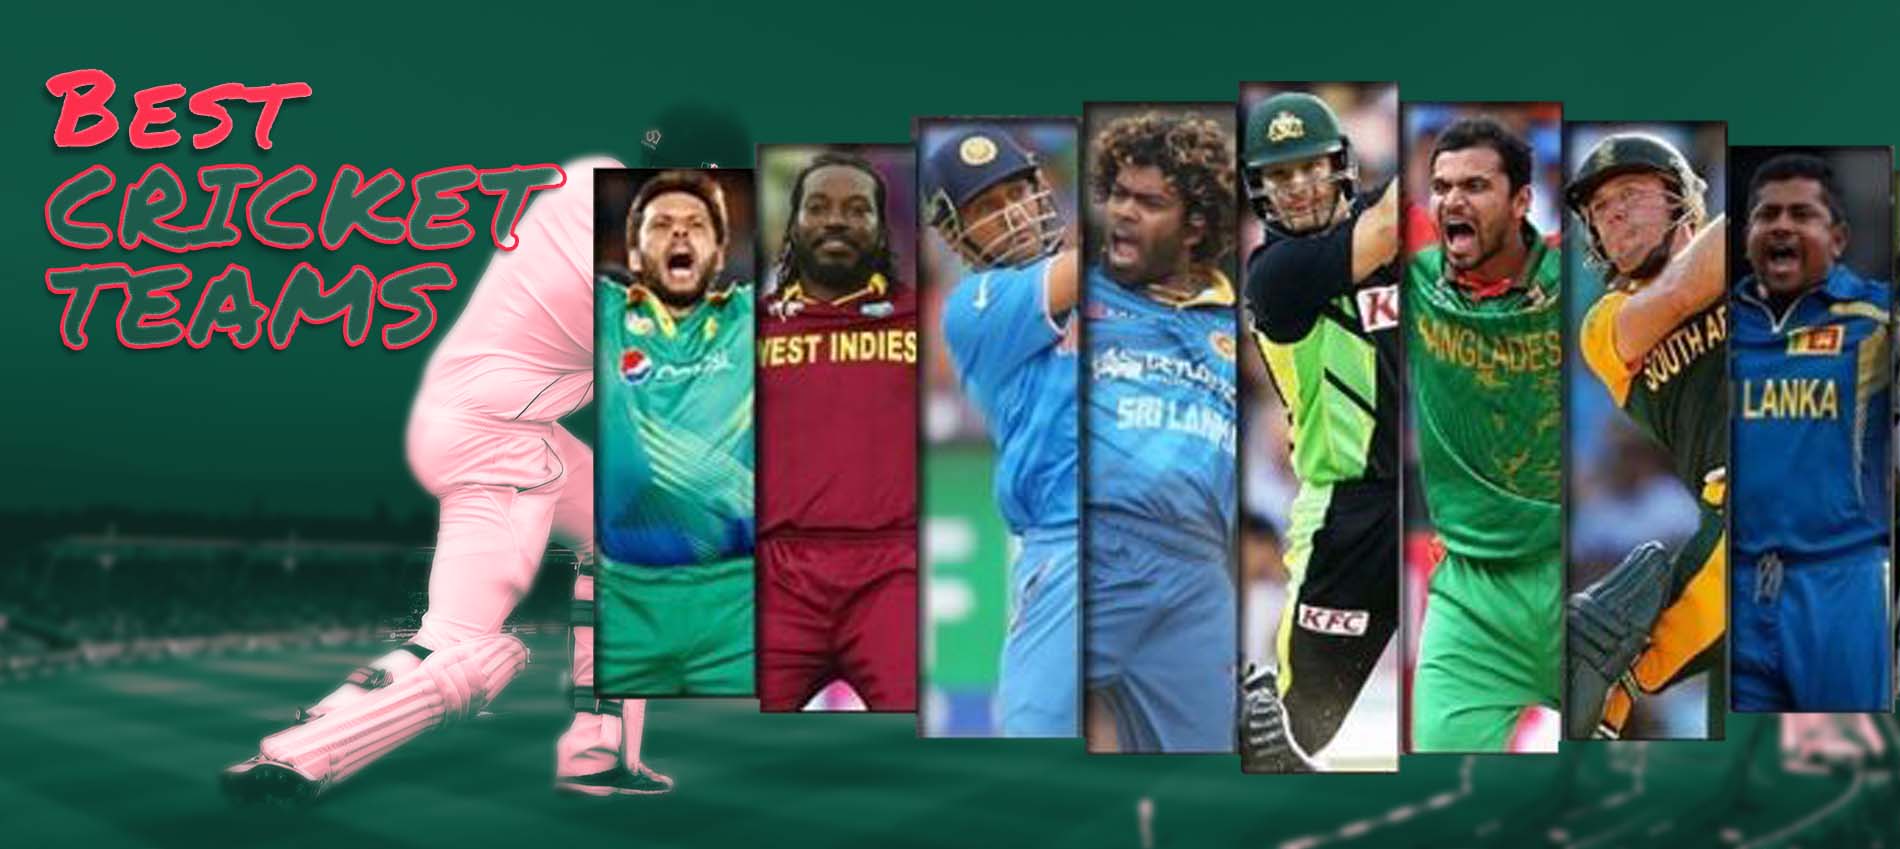 The best cricket betting teams in Bangladesh.